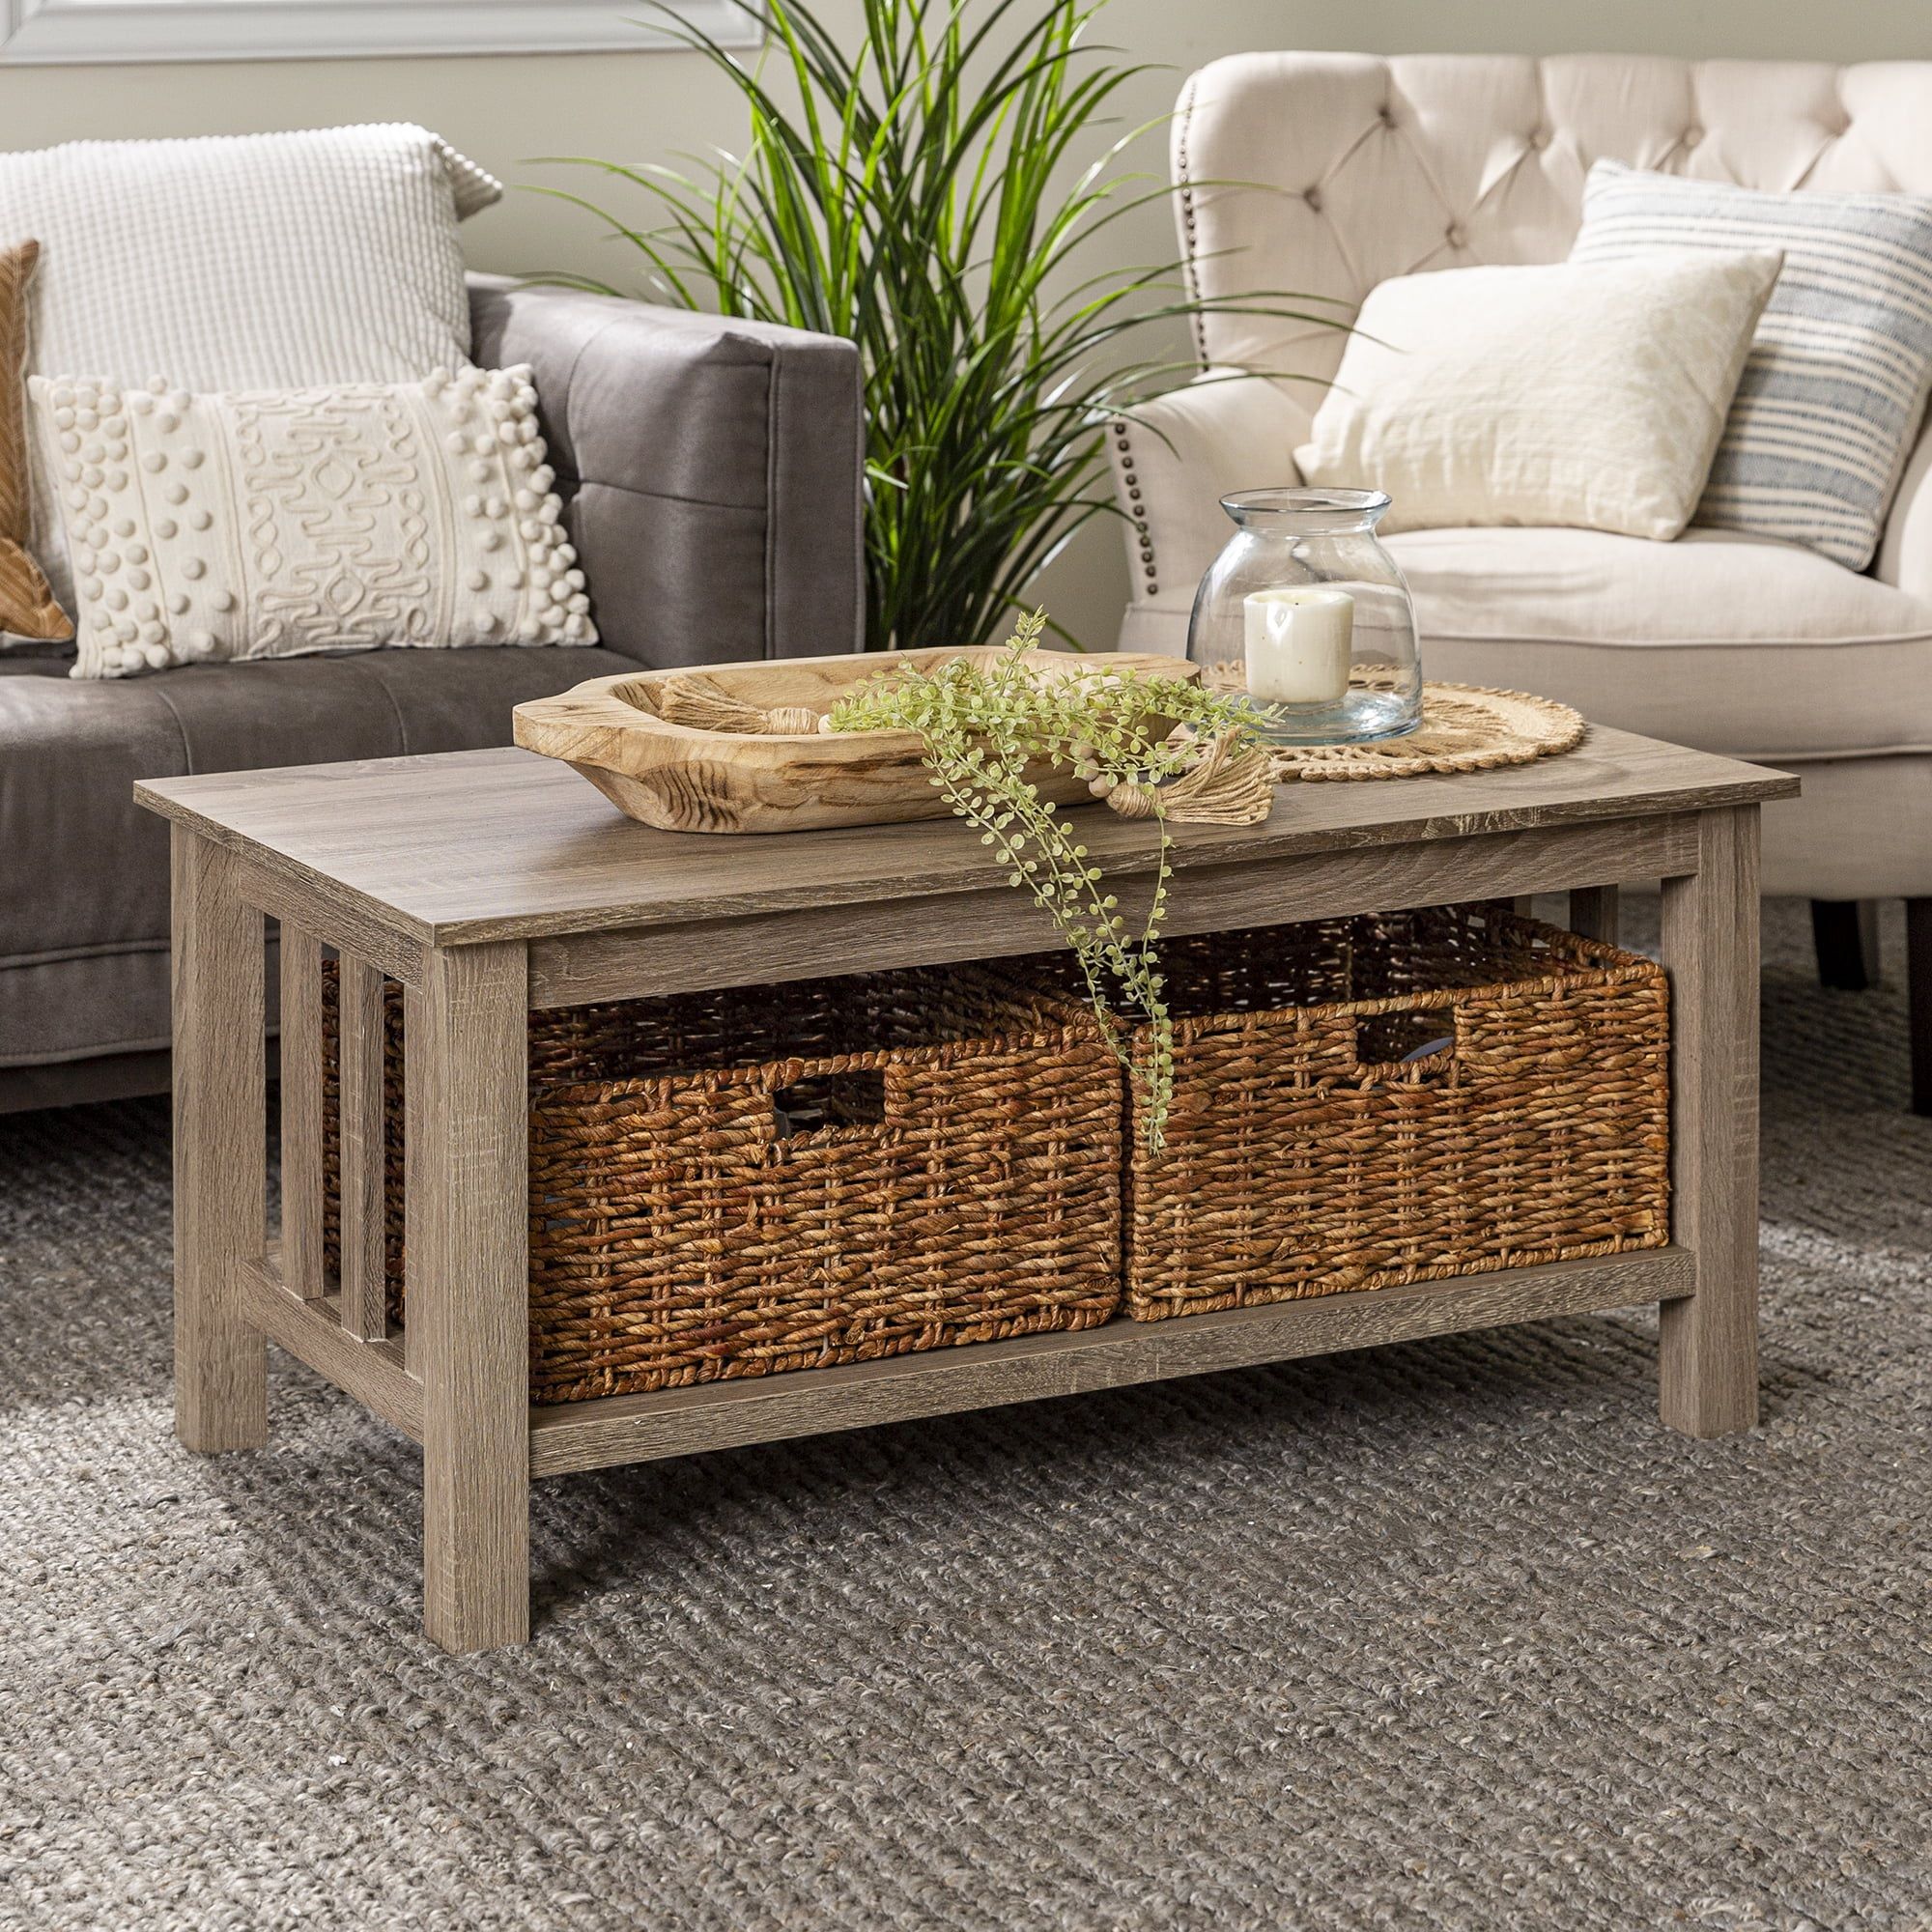 Woven Paths Traditional Storage Coffee Table W/ Bins $110 At Walmart Inside Woven Paths Coffee Tables (Photo 13 of 15)